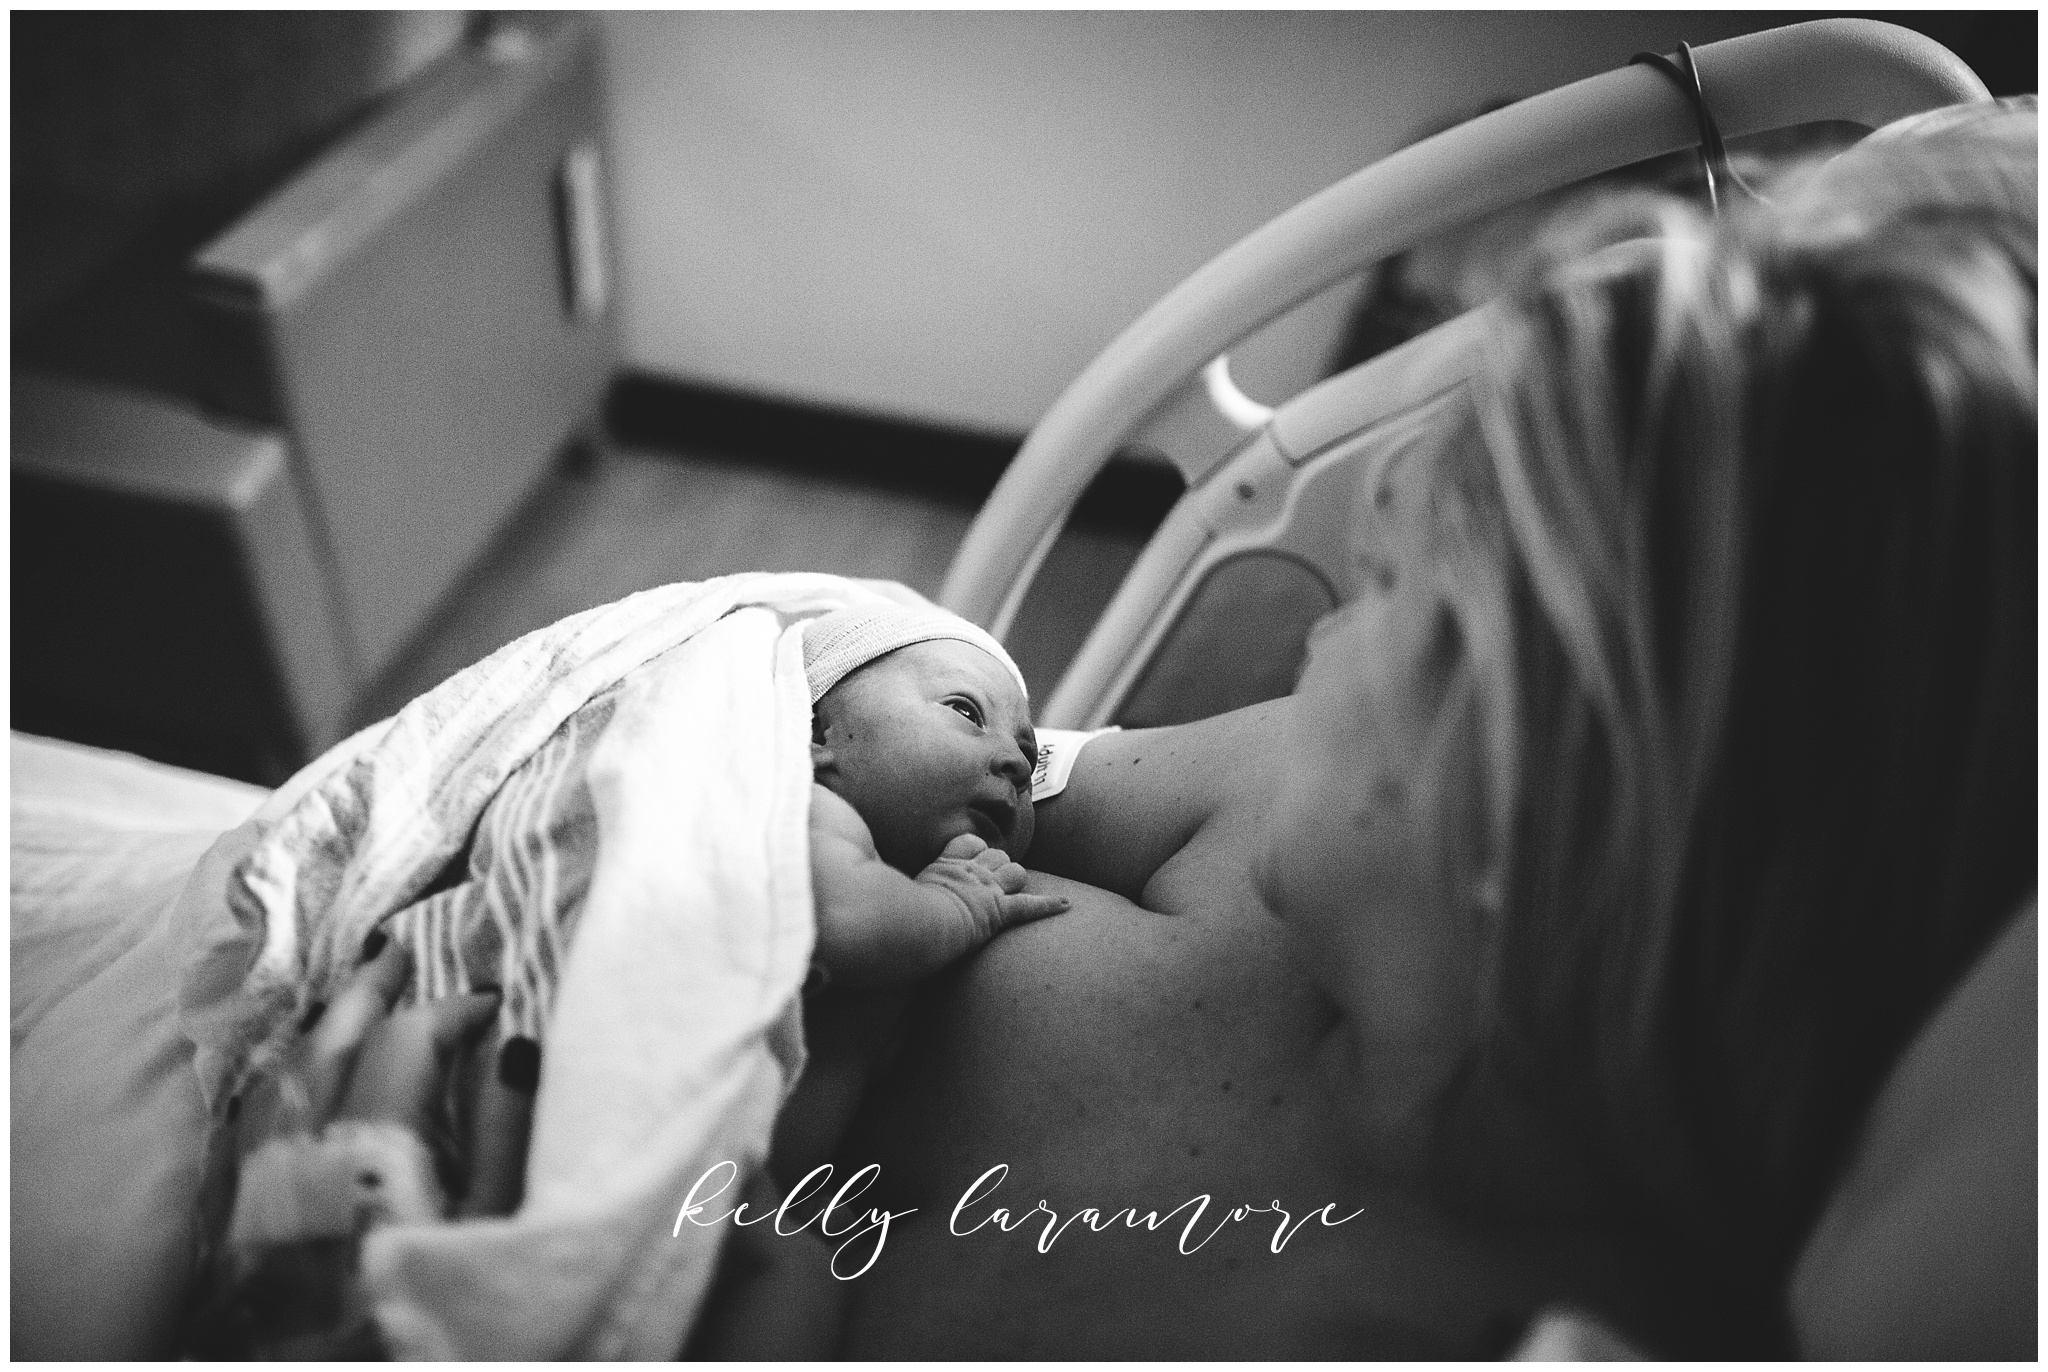 st louis birth story photographer, st louis family photographer, missouri baptist birth center birth, delivery room, baby looking at mom